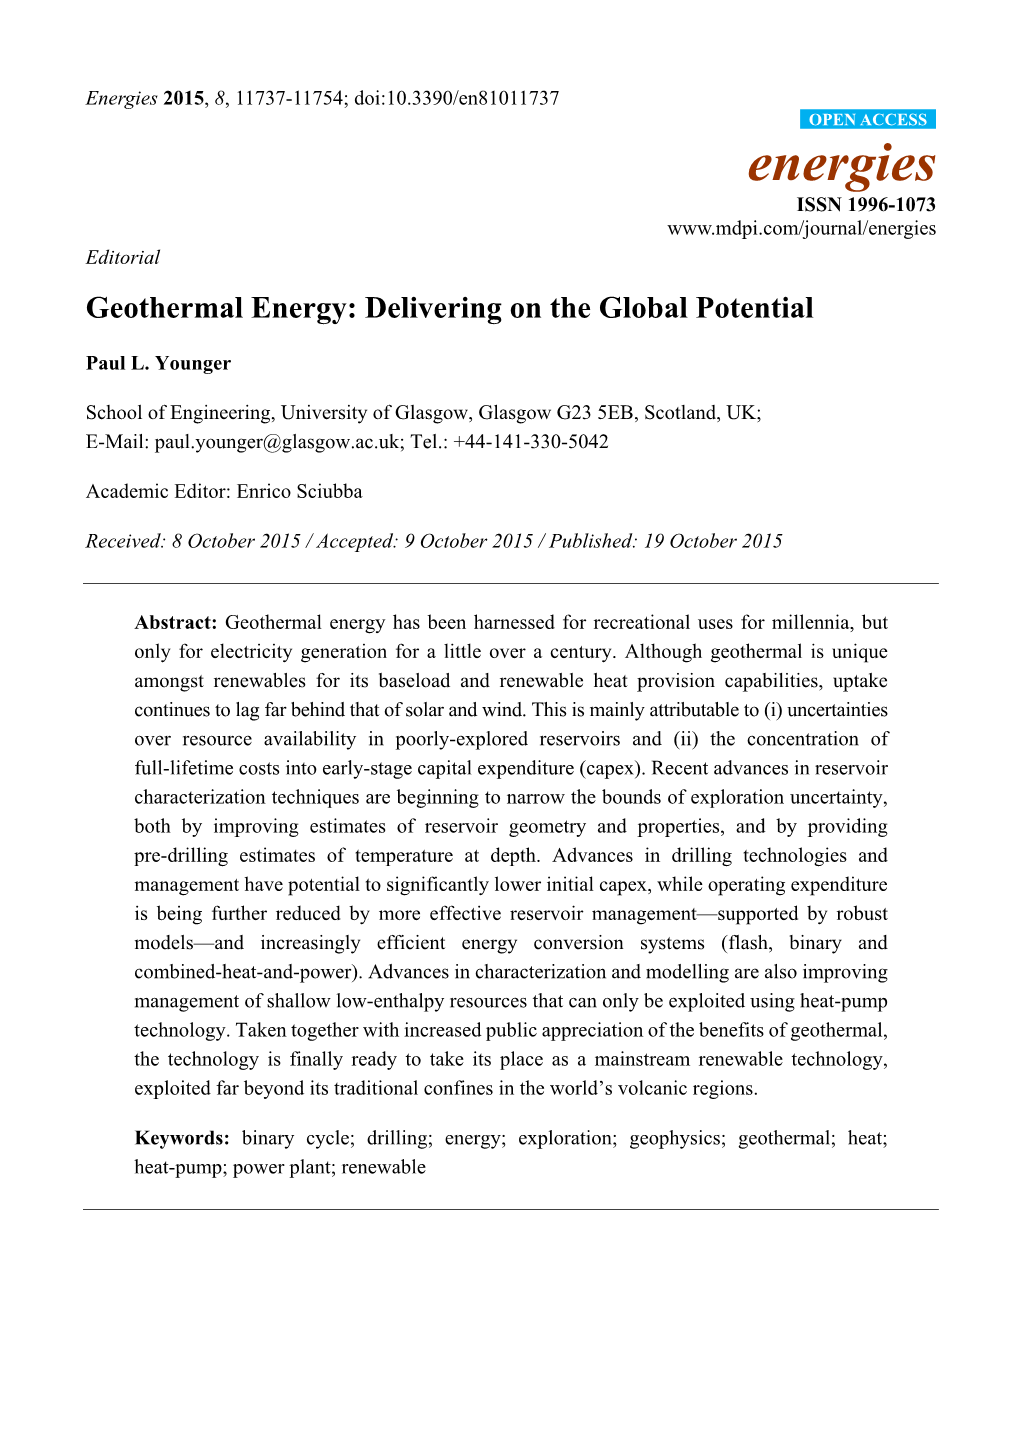 Geothermal Energy: Delivering on the Global Potential